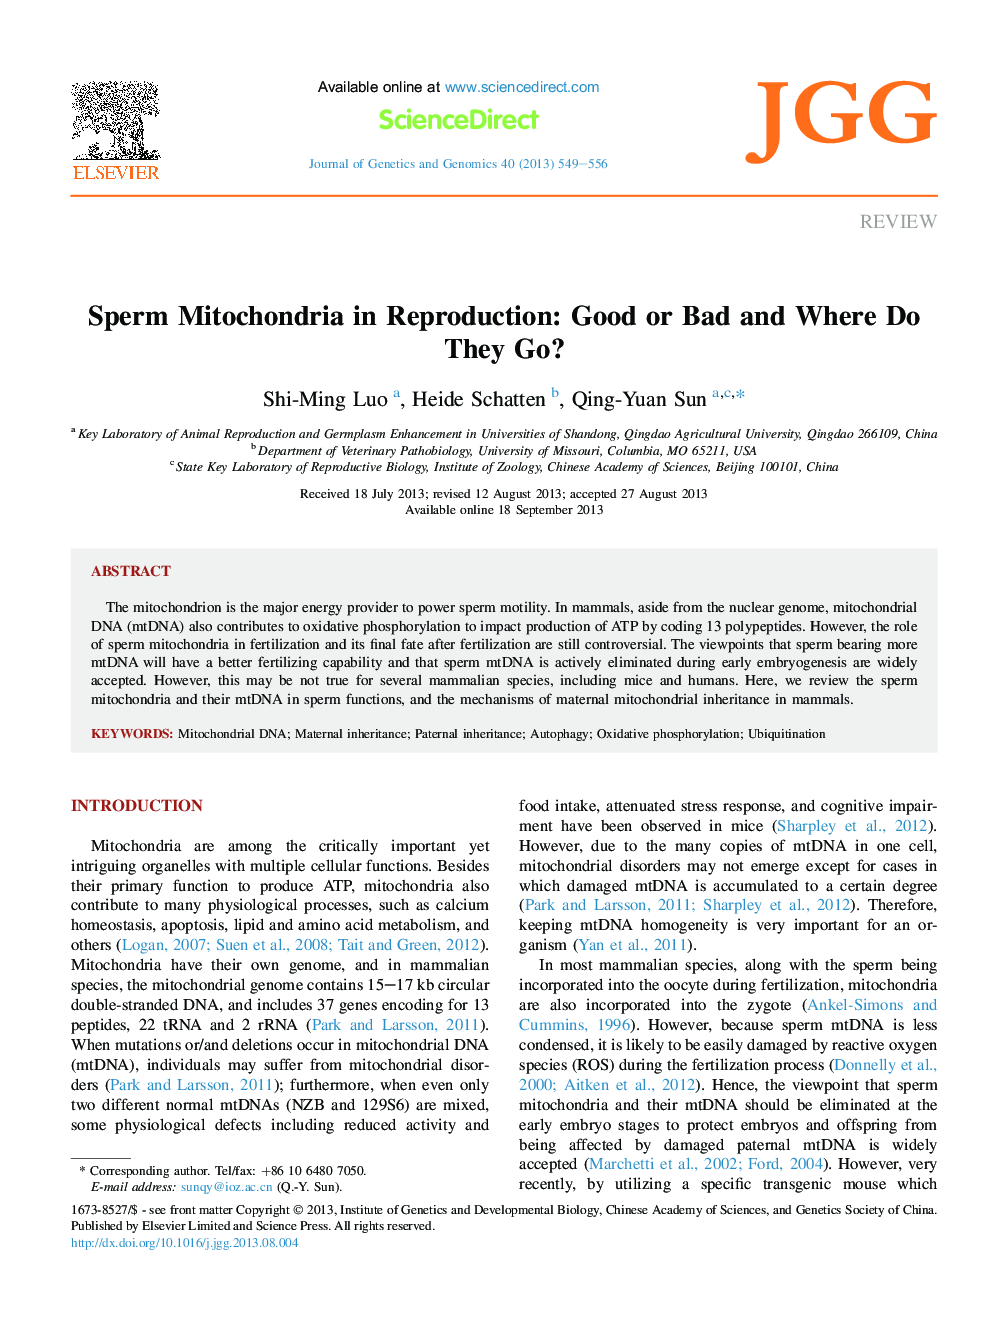 Sperm Mitochondria in Reproduction: Good or Bad and Where Do They Go?